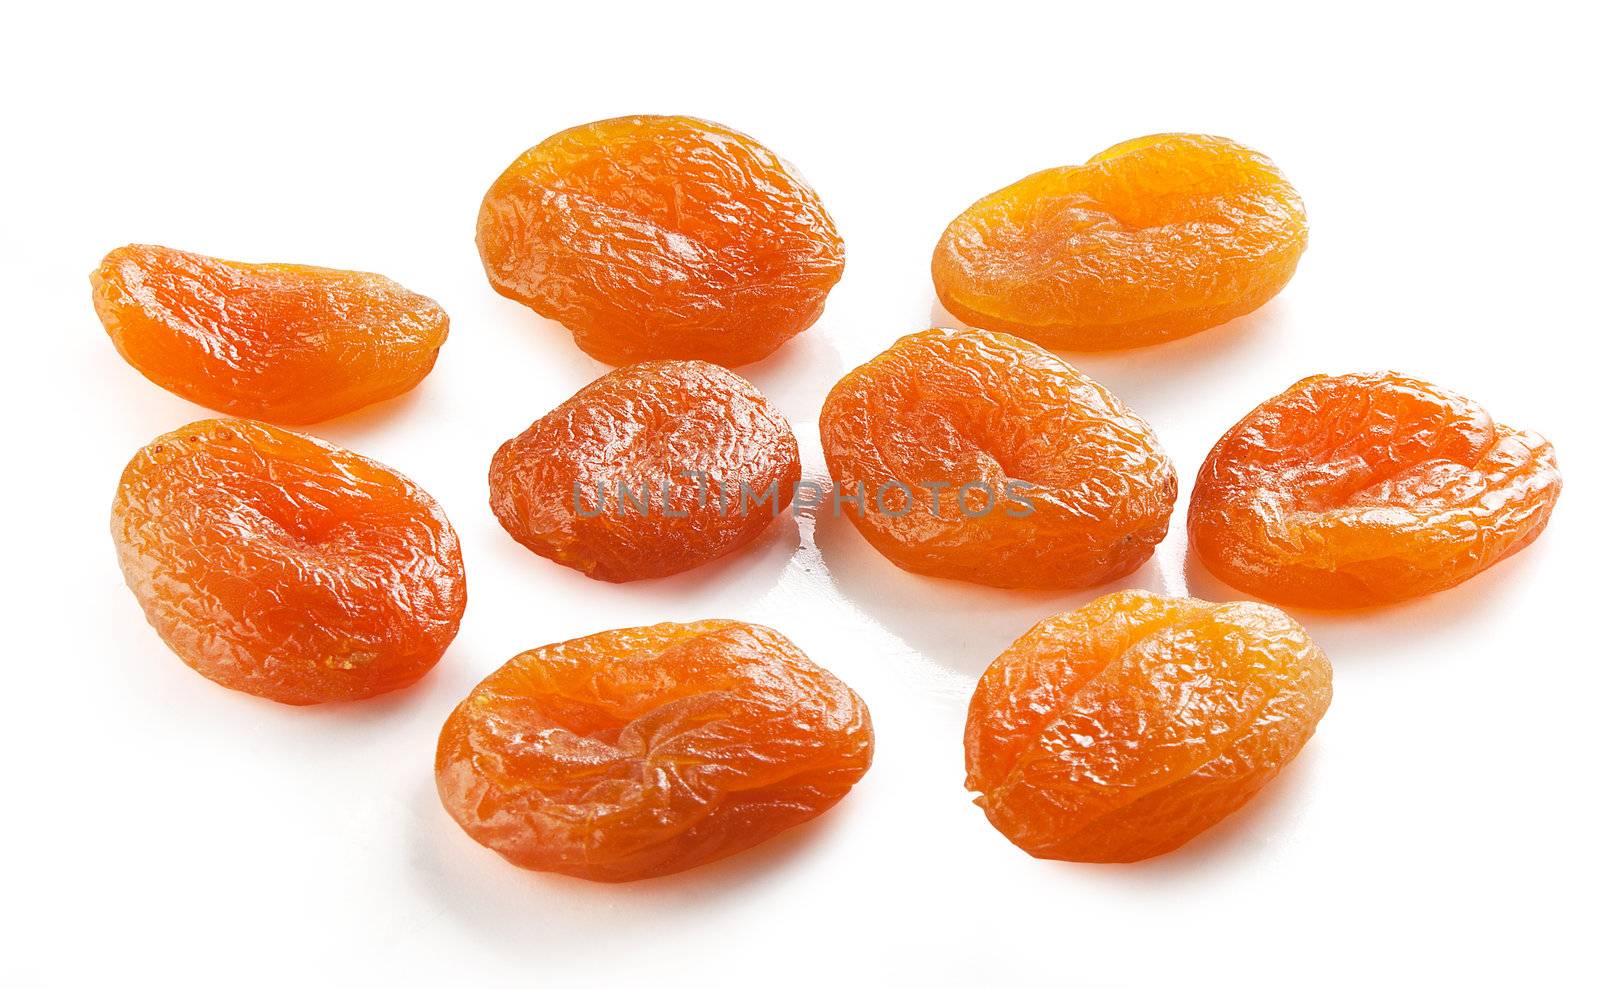 Dried apricots by Angorius